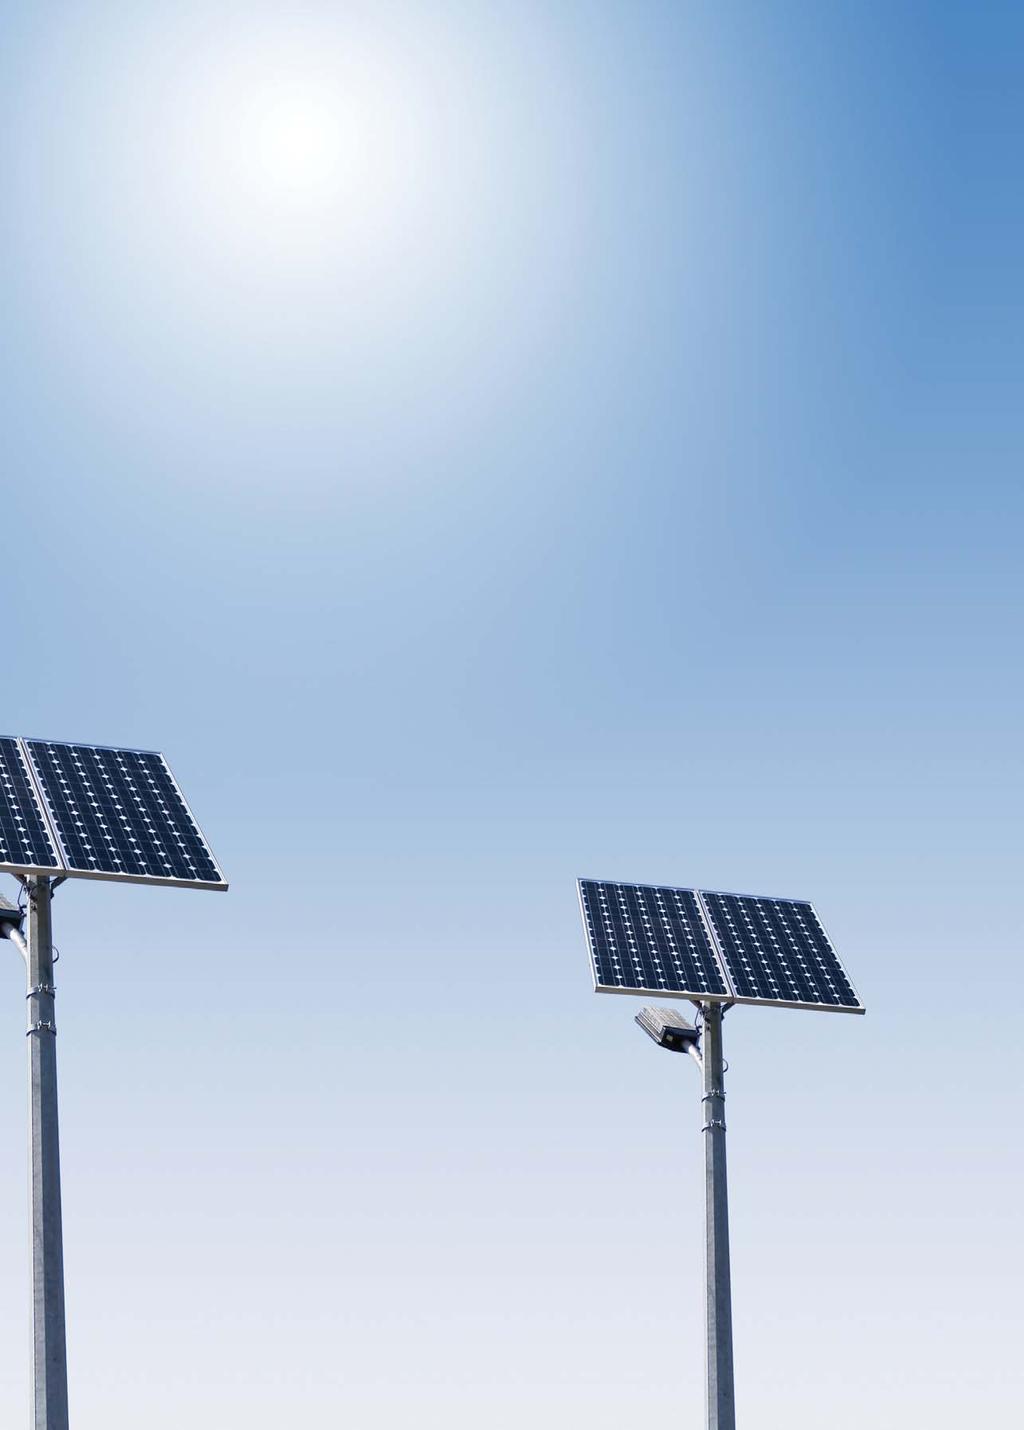 Ordinary Solar LED light system parts are usualy separated from each others and gathered on one pole, however